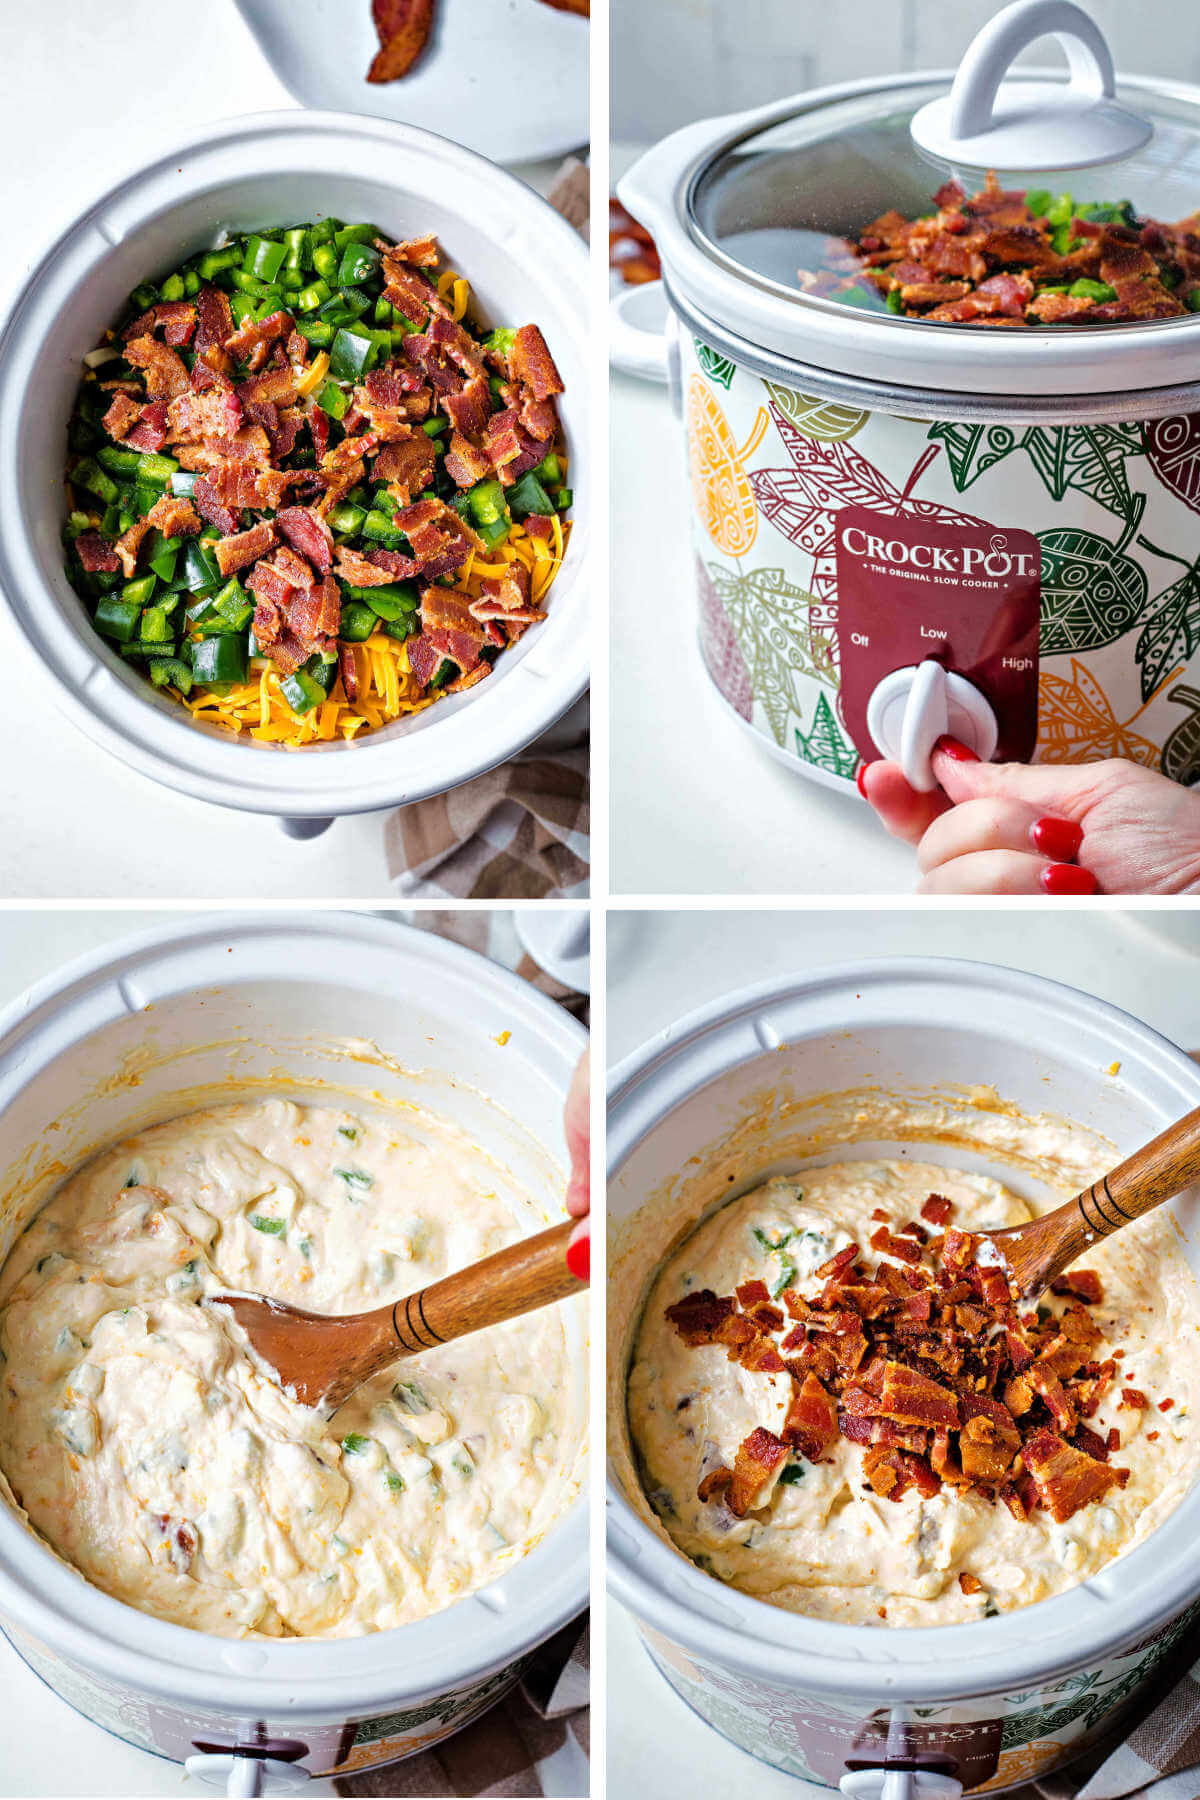 bacon and jalapeno peppers added to a slow cooker with cream cheese; setting the slow cooker to low temperature cooking.